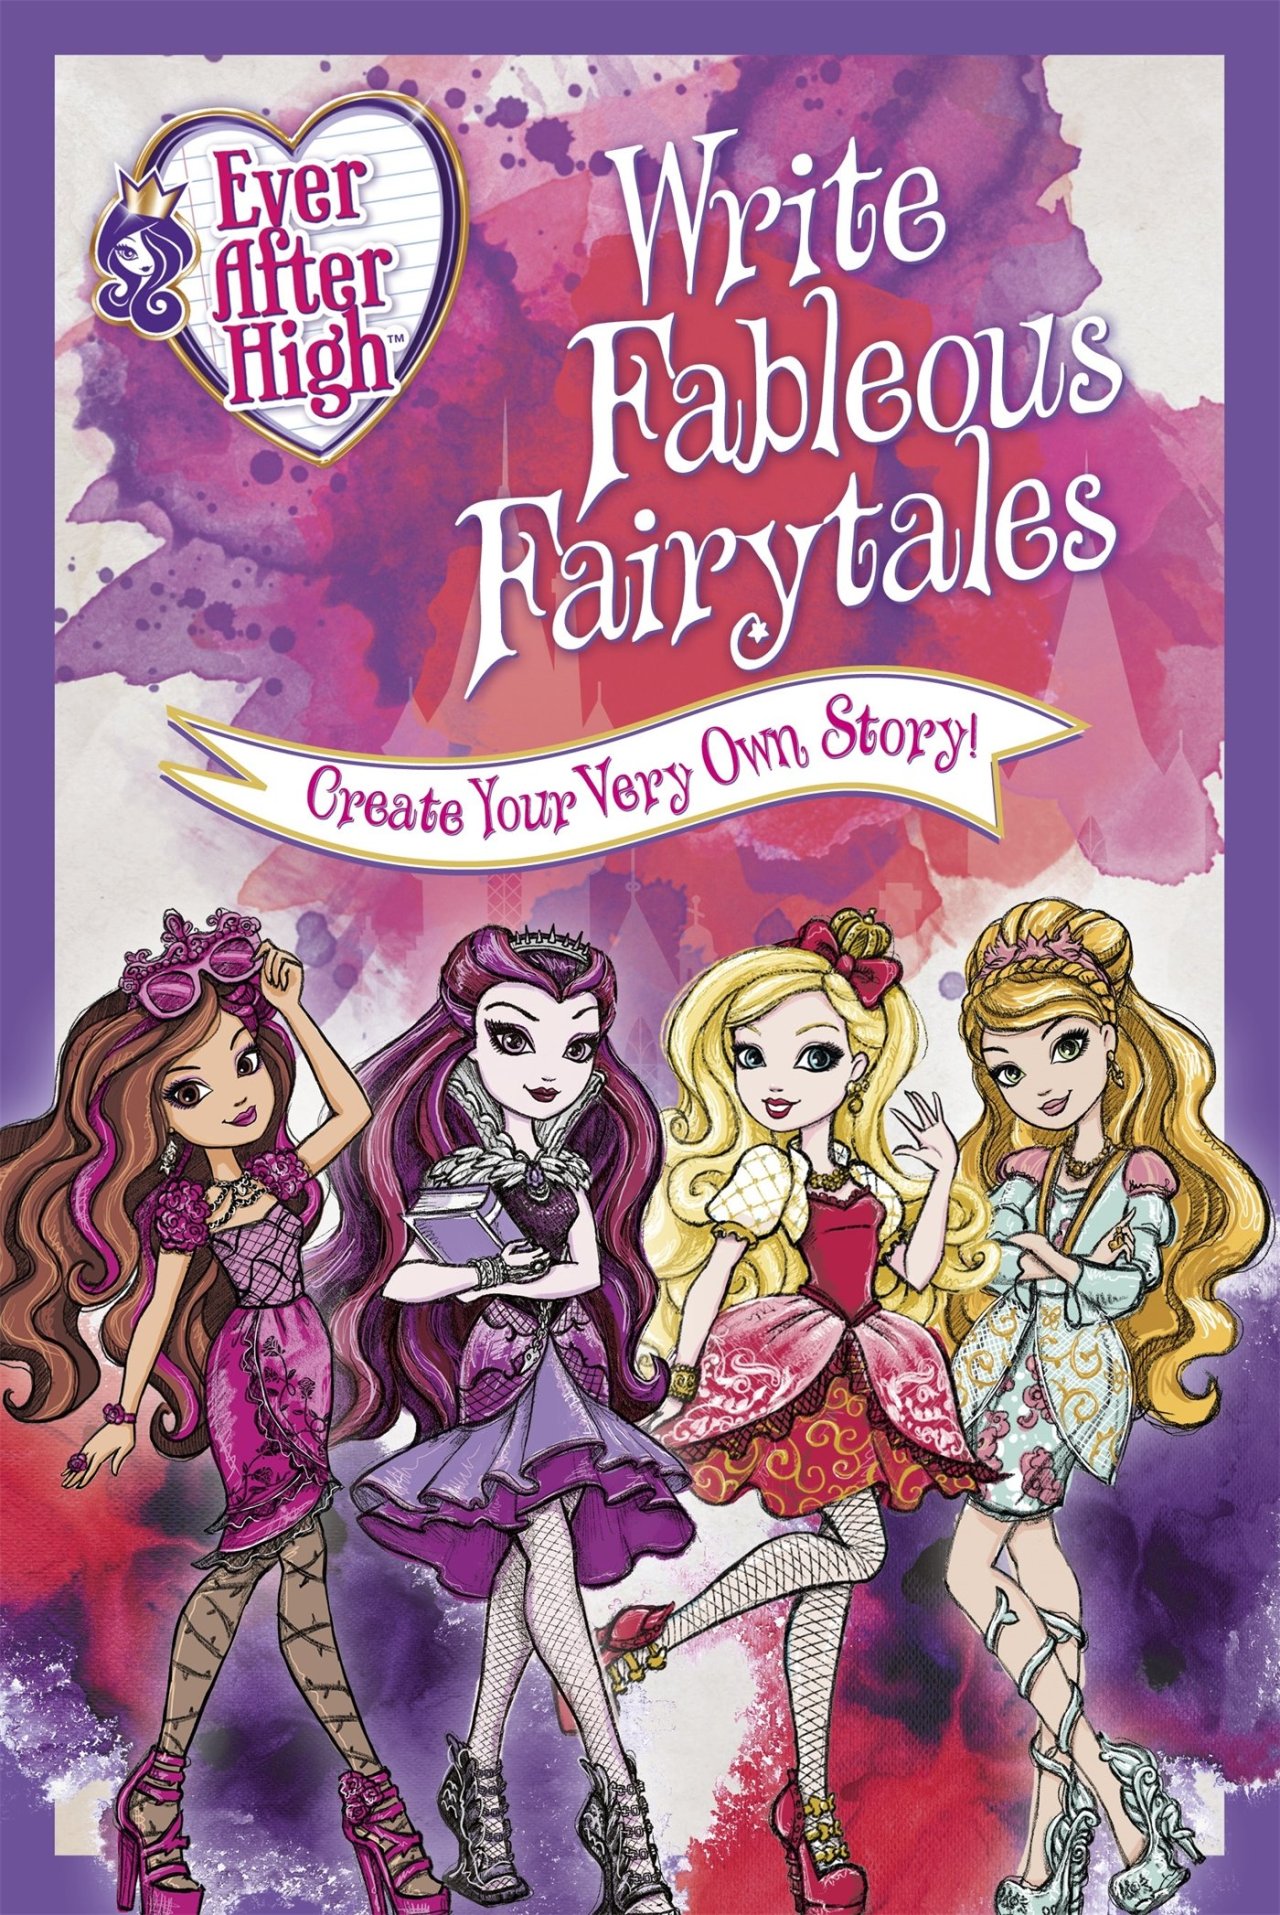 New activities book “Ever After High - Write Fableous Fairytales” will relese in 20 September 2016!